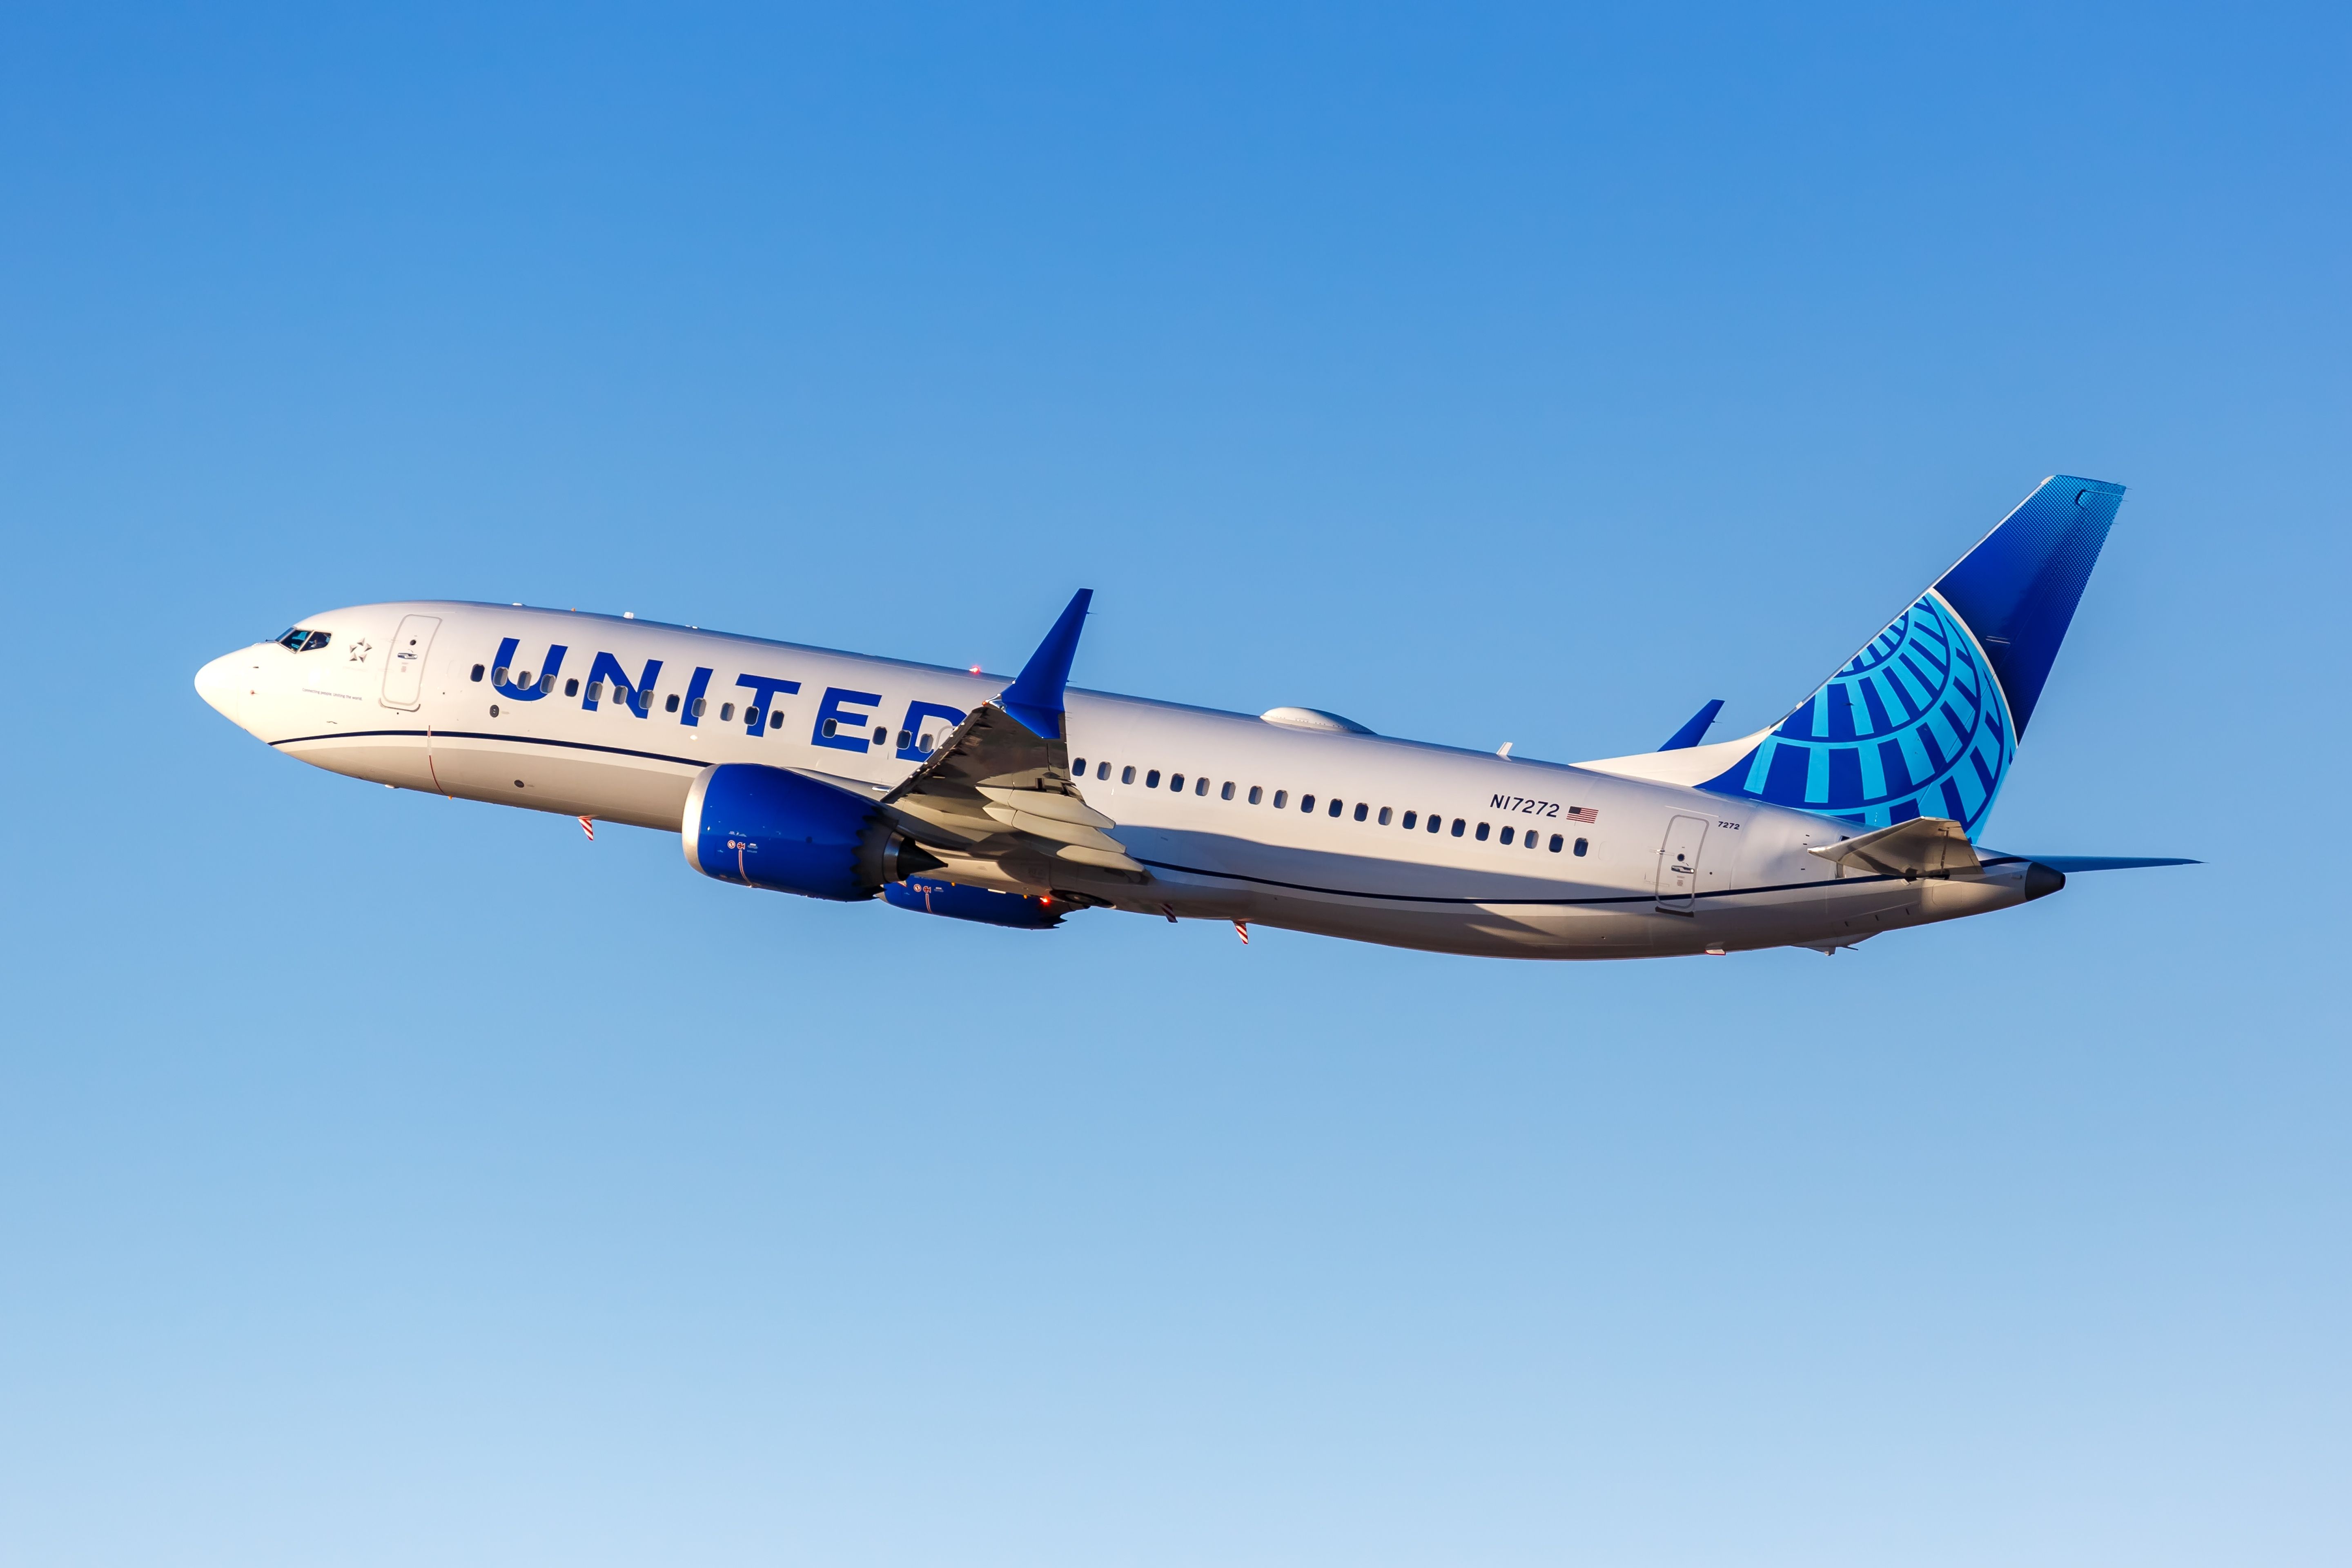 A United Airlines Boeing 737 MAX